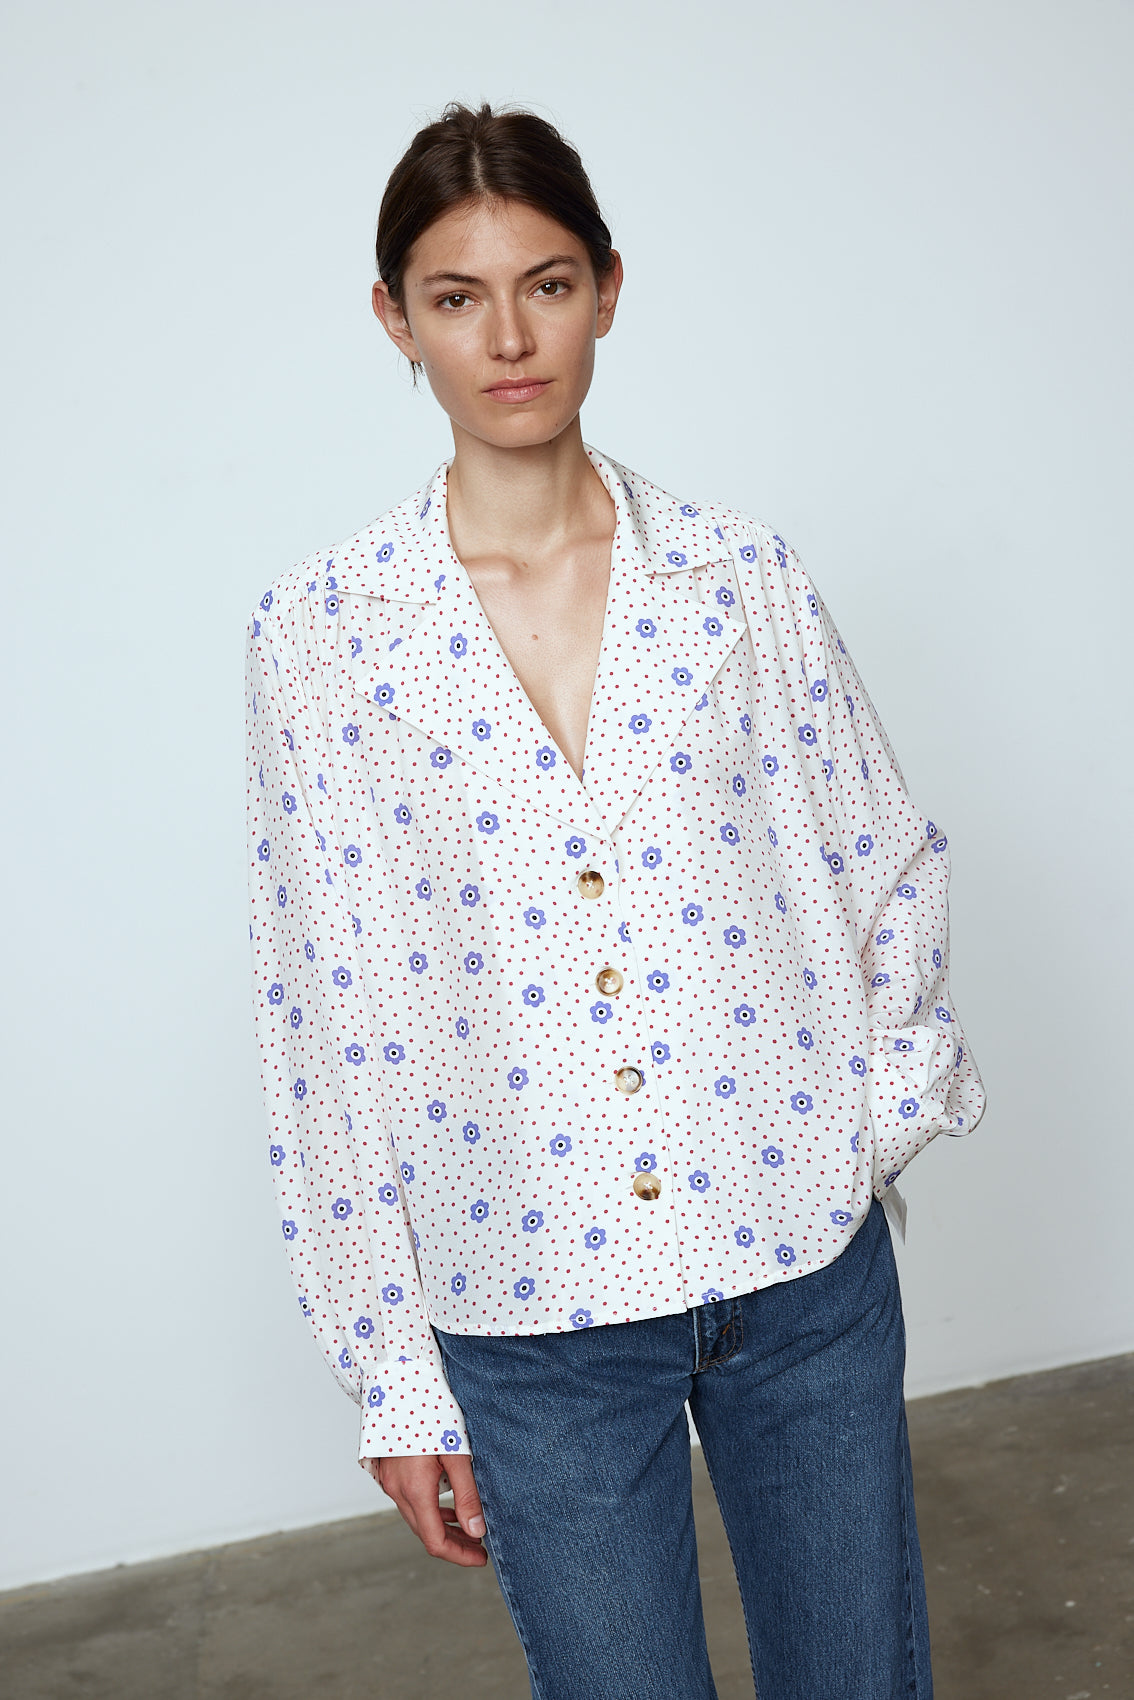 The Bonsai Shirt is made in soft silk fabric featuring our White Daisy print. The Shirt has long draped sleeves, a deep-cut oversized shirt collar, and buttons on the front.   Style it with jeans and a colorful belt, together with a vest or denim jacket.   Material: 100% mulberry silk.  The model is 179cm (5'10") and wears size S.